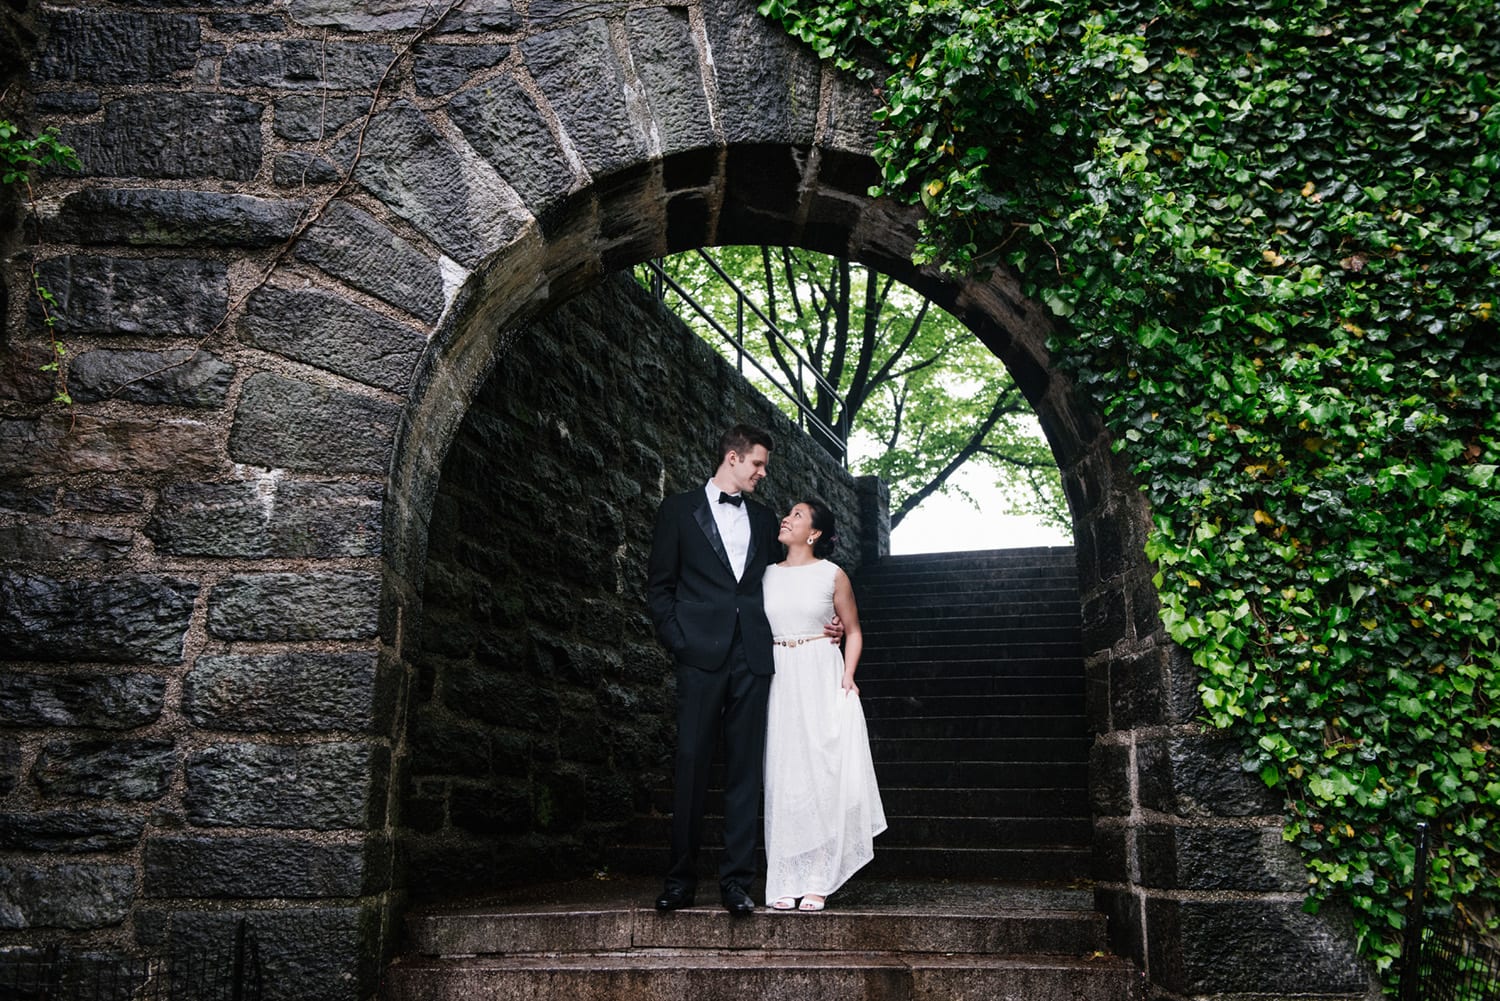 NYC Elopement locations Fort Tryon Park